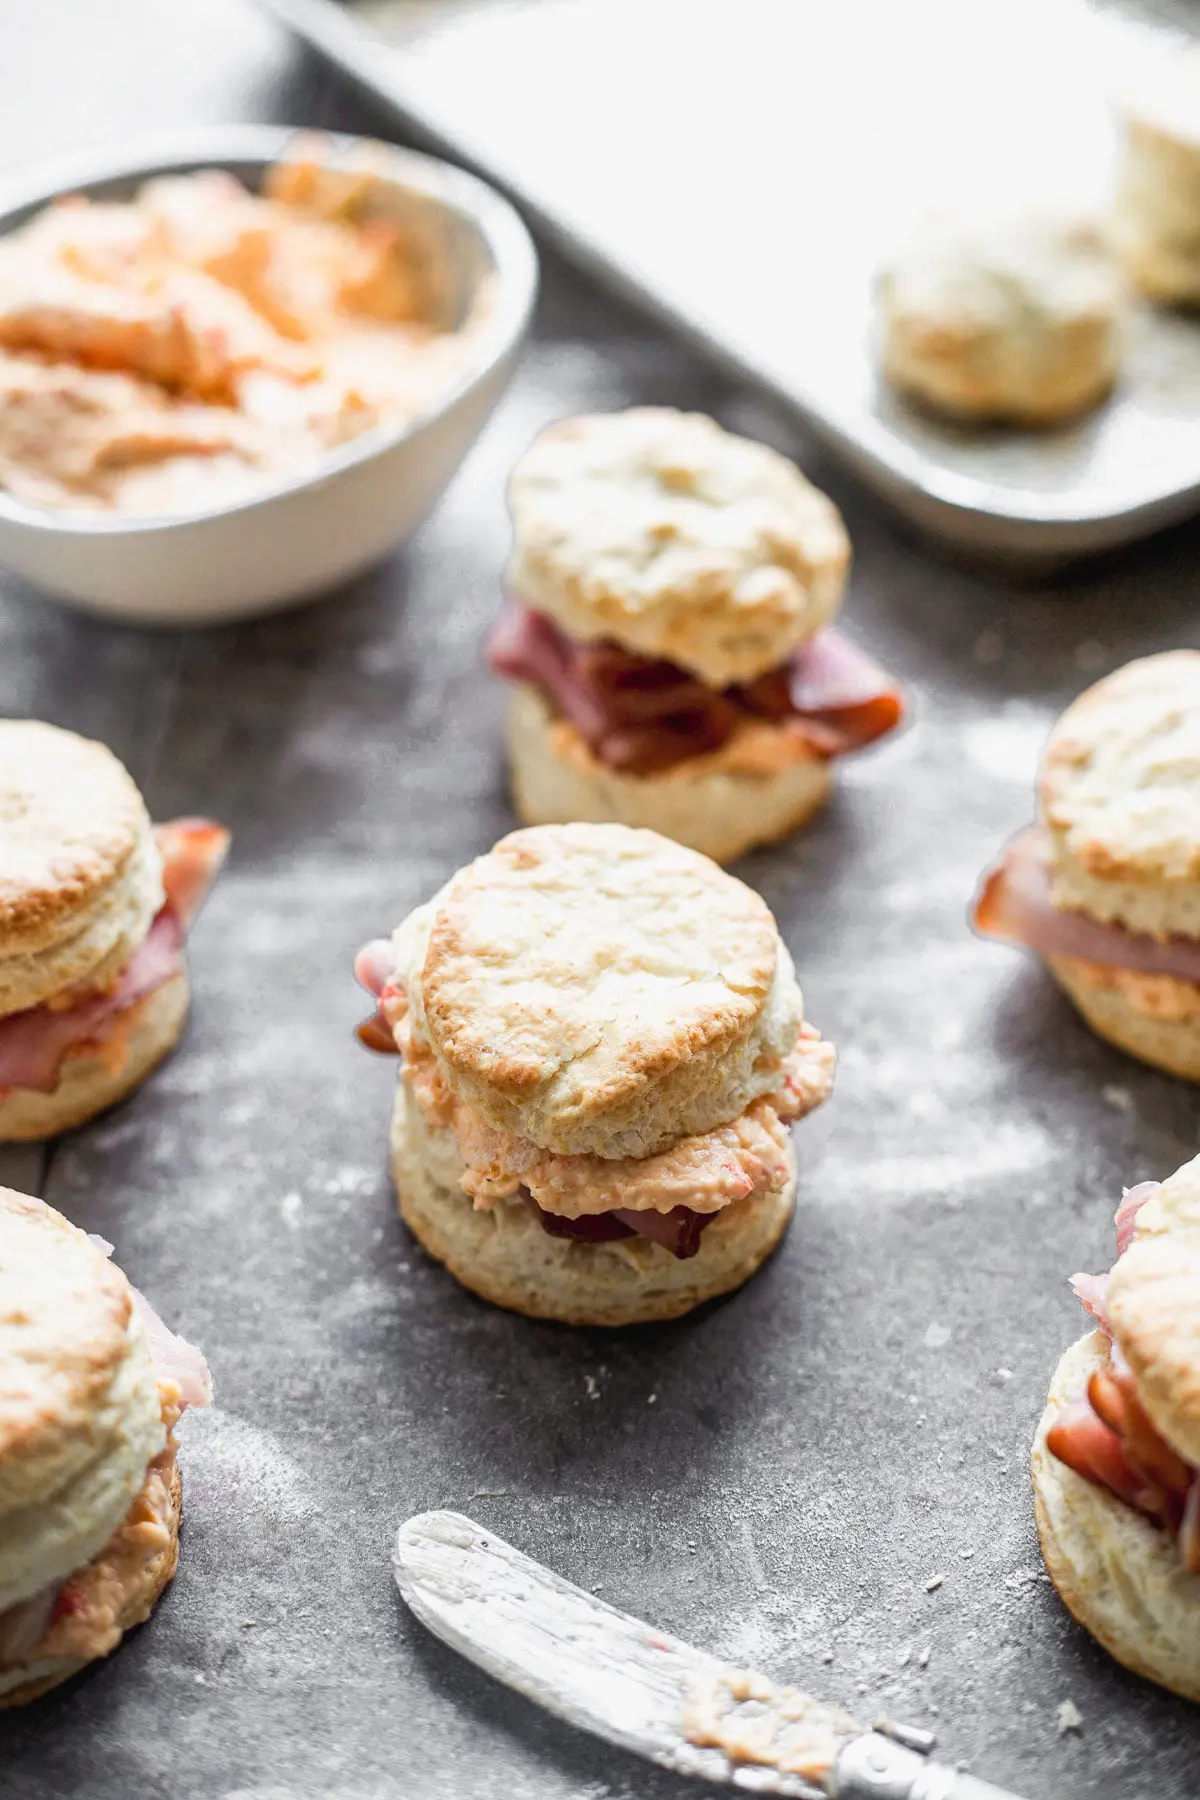 These Ham & Pimento Cheese Sandwiches are simple, but bursting with flavor. We take our favorite biscuit recipe that's light, flaky, and oh-so delicious and smother the inside with warm pimento cheese and ham. The perfect bridal shower, lunch or side to soup or salad.